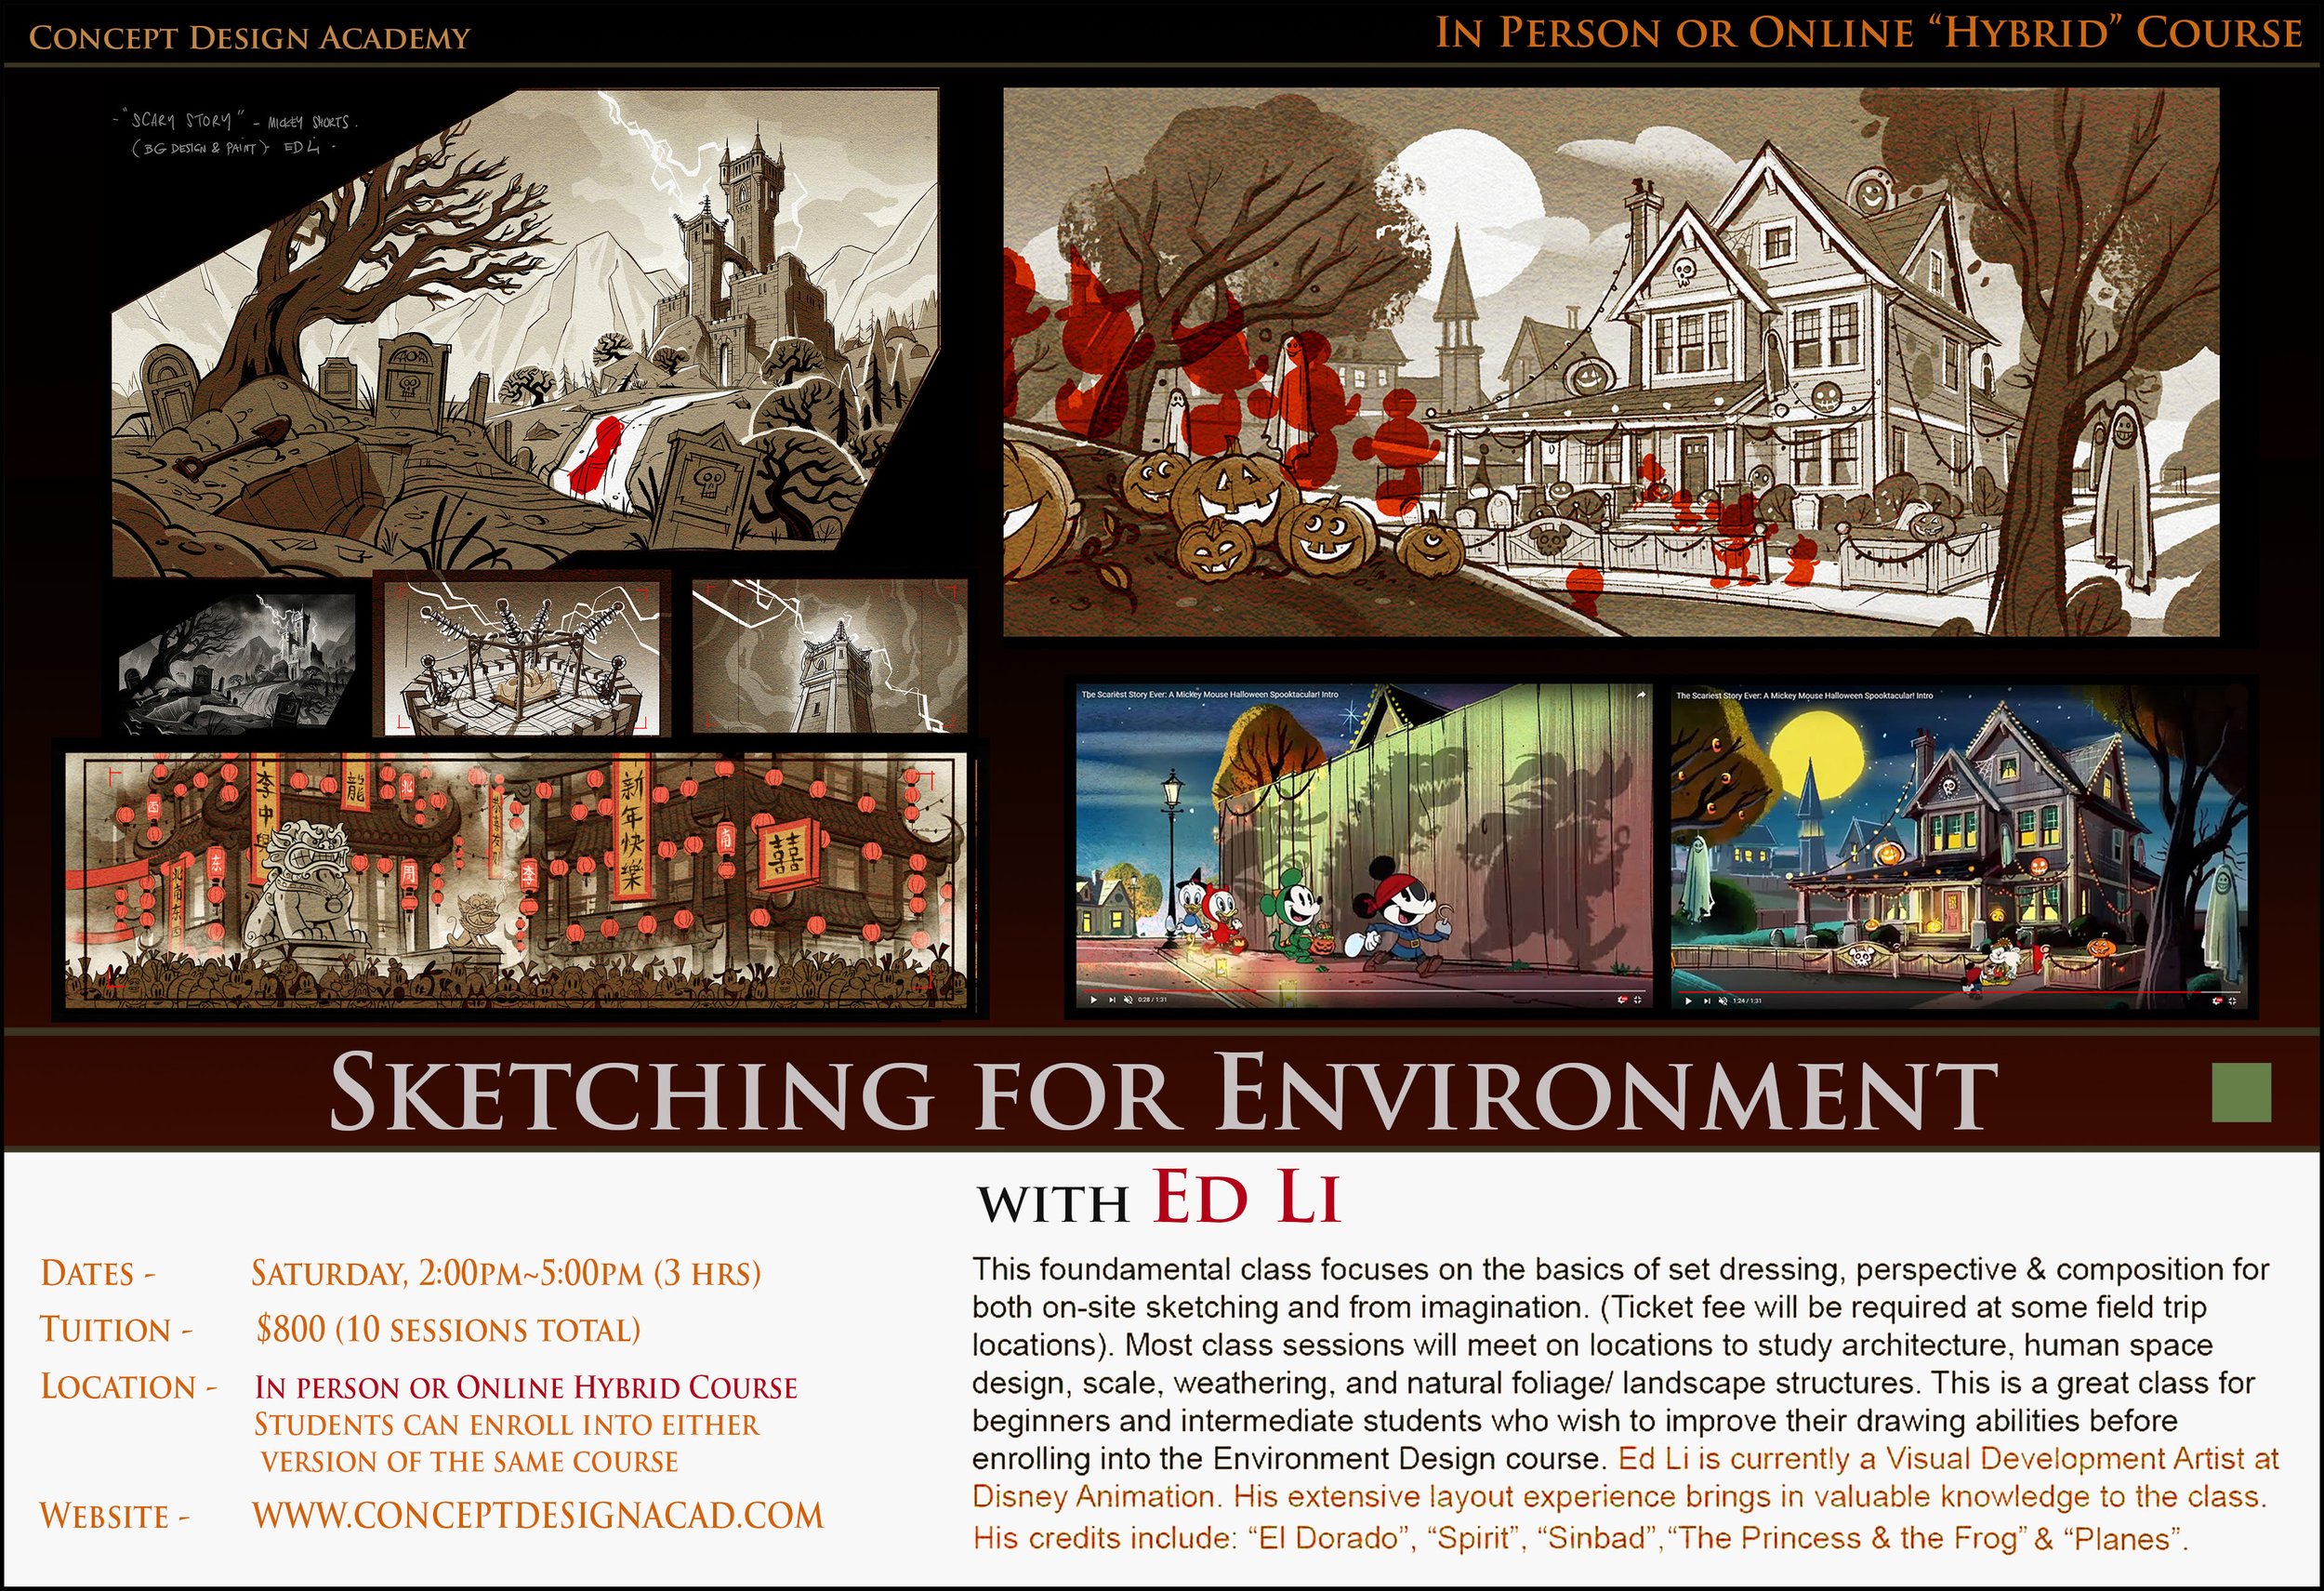 SP24 - Sketching for Environment with Ed Li for Website.jpg